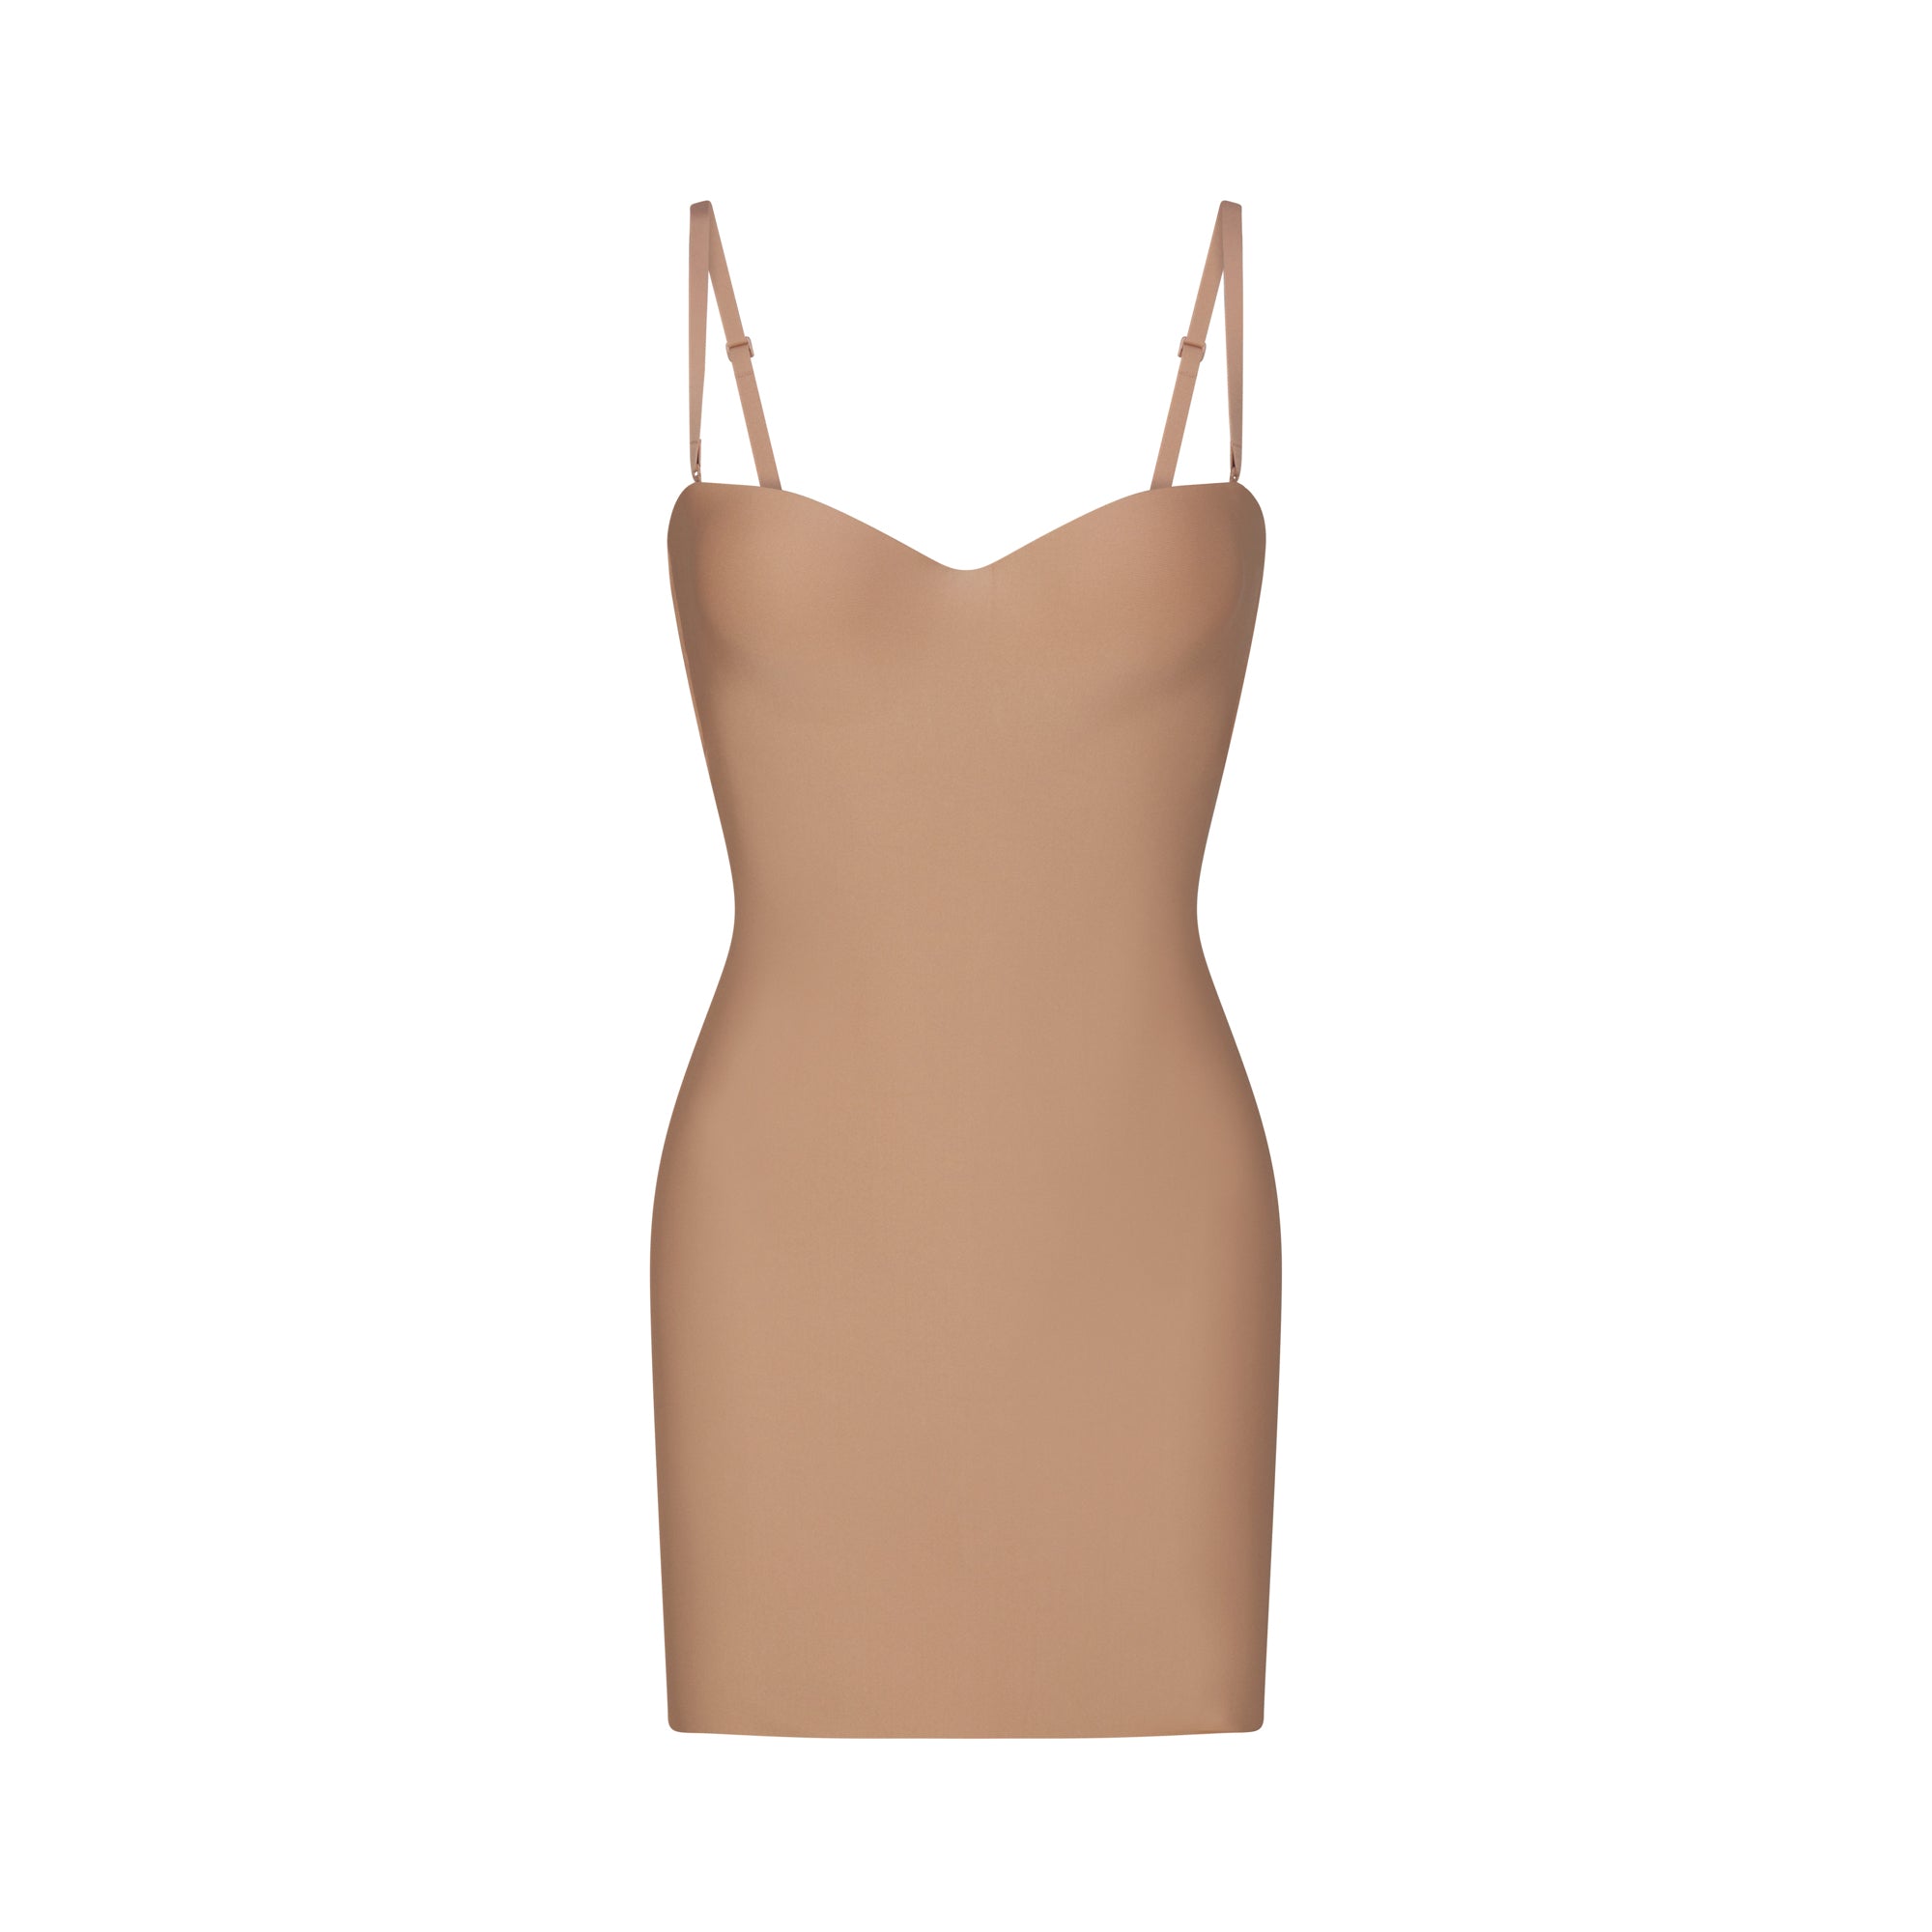 Details more than 126 shapewear for bodycon dress latest